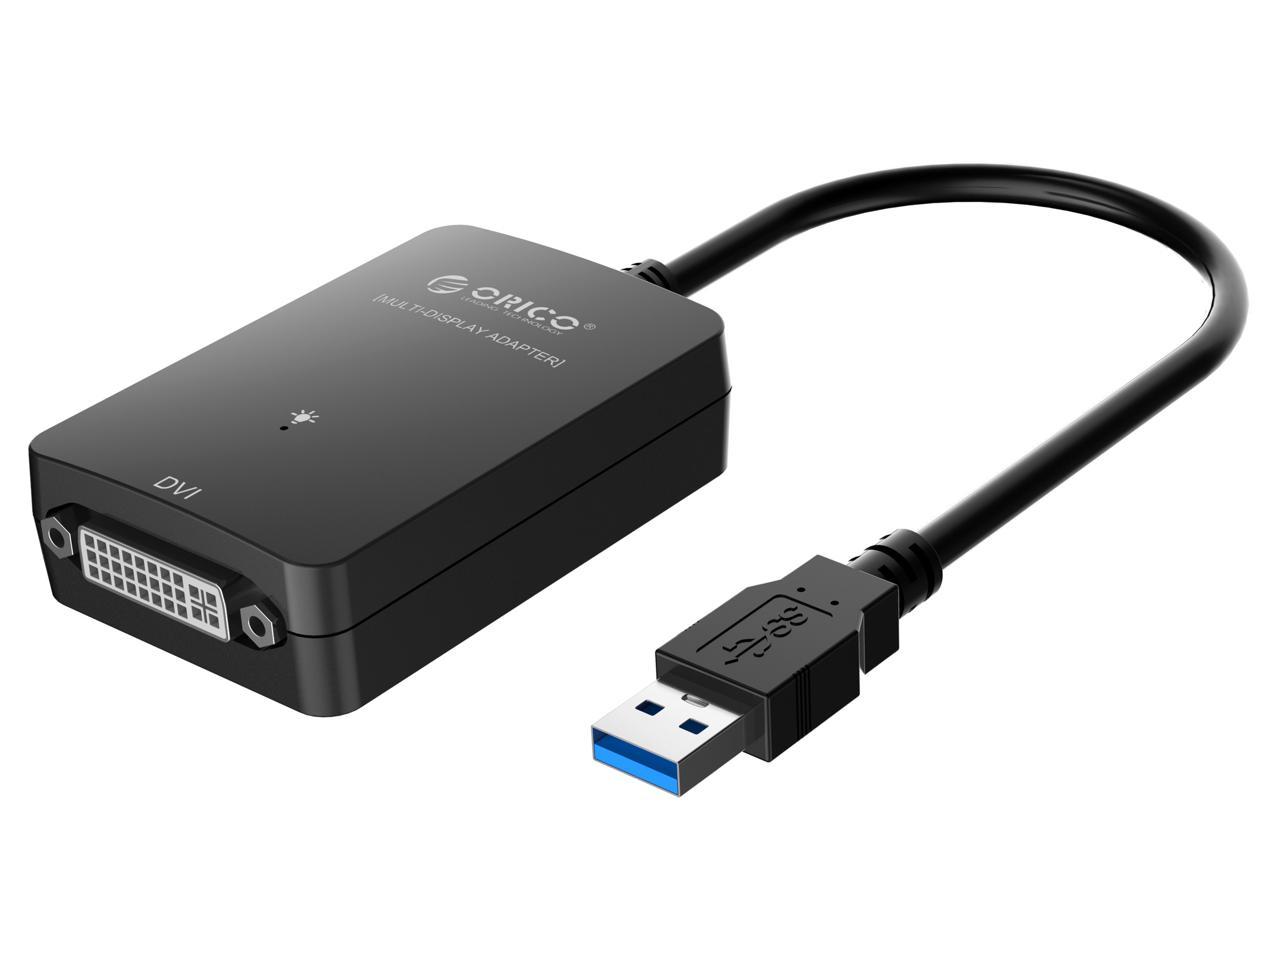 Deviation Hong Kong Leia ORICO DU3D USB 3.0 to DVI External Video Graphics Adapter Card for Multi  Monitor up to 2048x1152 / 1920x1080 support MAC, Windows XP, Vista, 7, 8  and 8.1 - Newegg.com